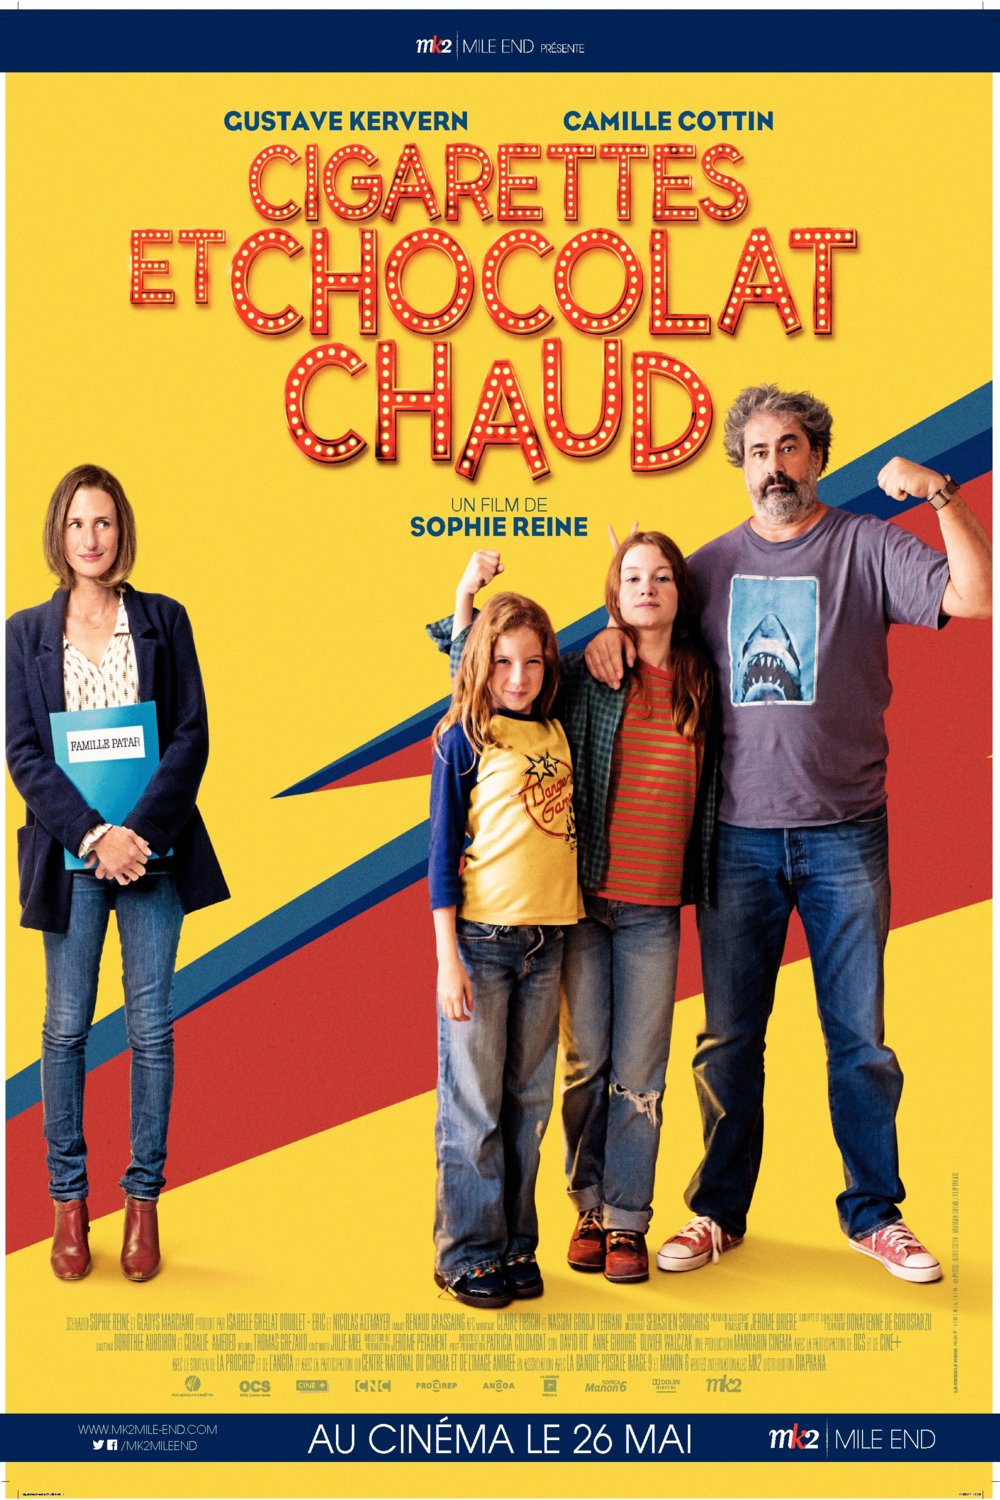 Poster of the movie Cigarettes et chocolat chaud